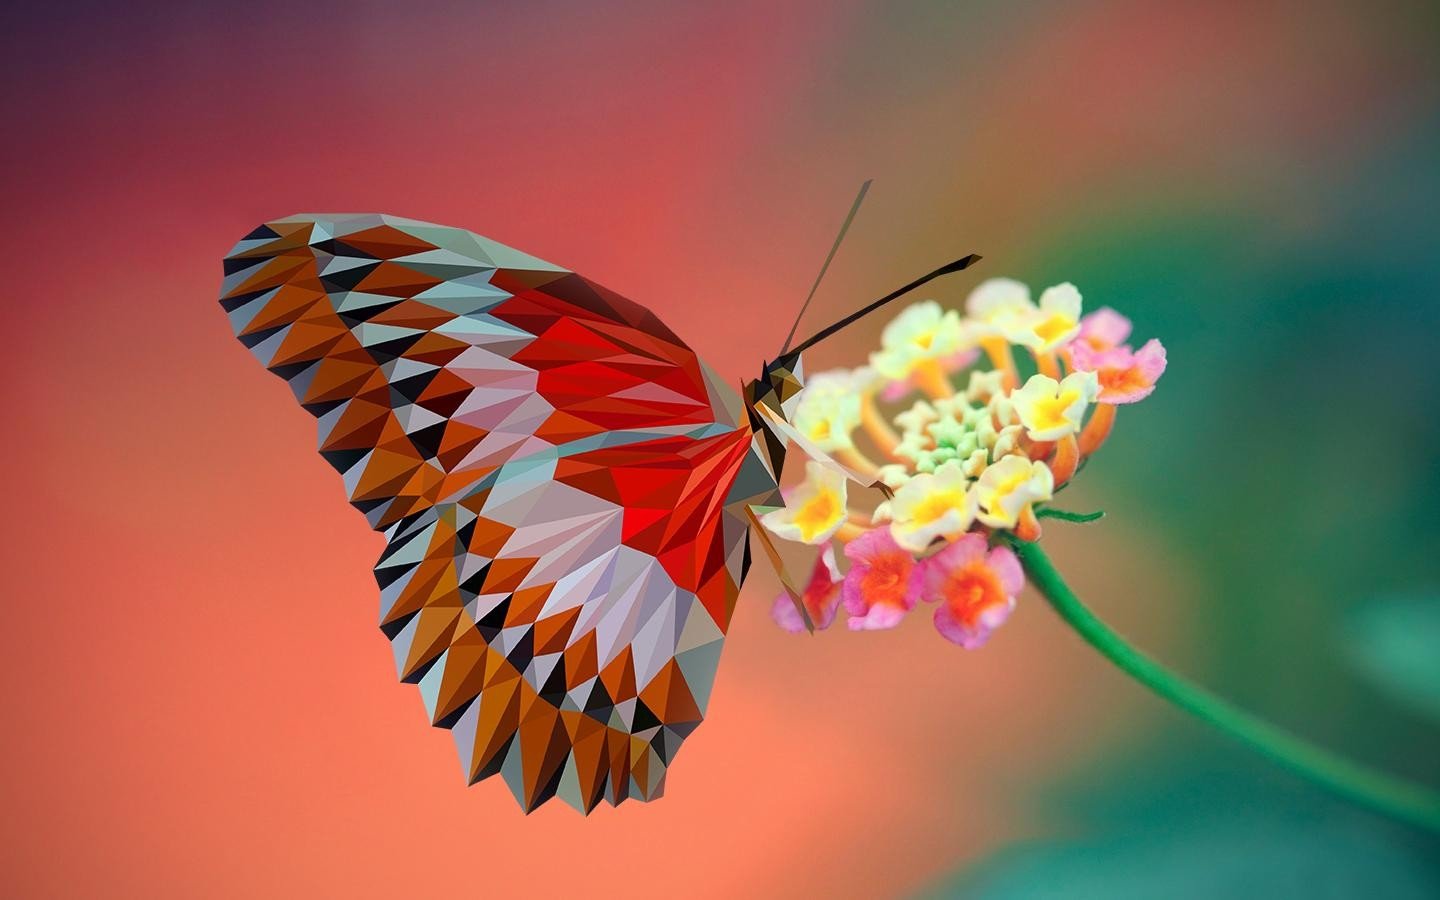 butterfly, Low poly, Nature, Closeup, Flowers, Digital art Wallpapers